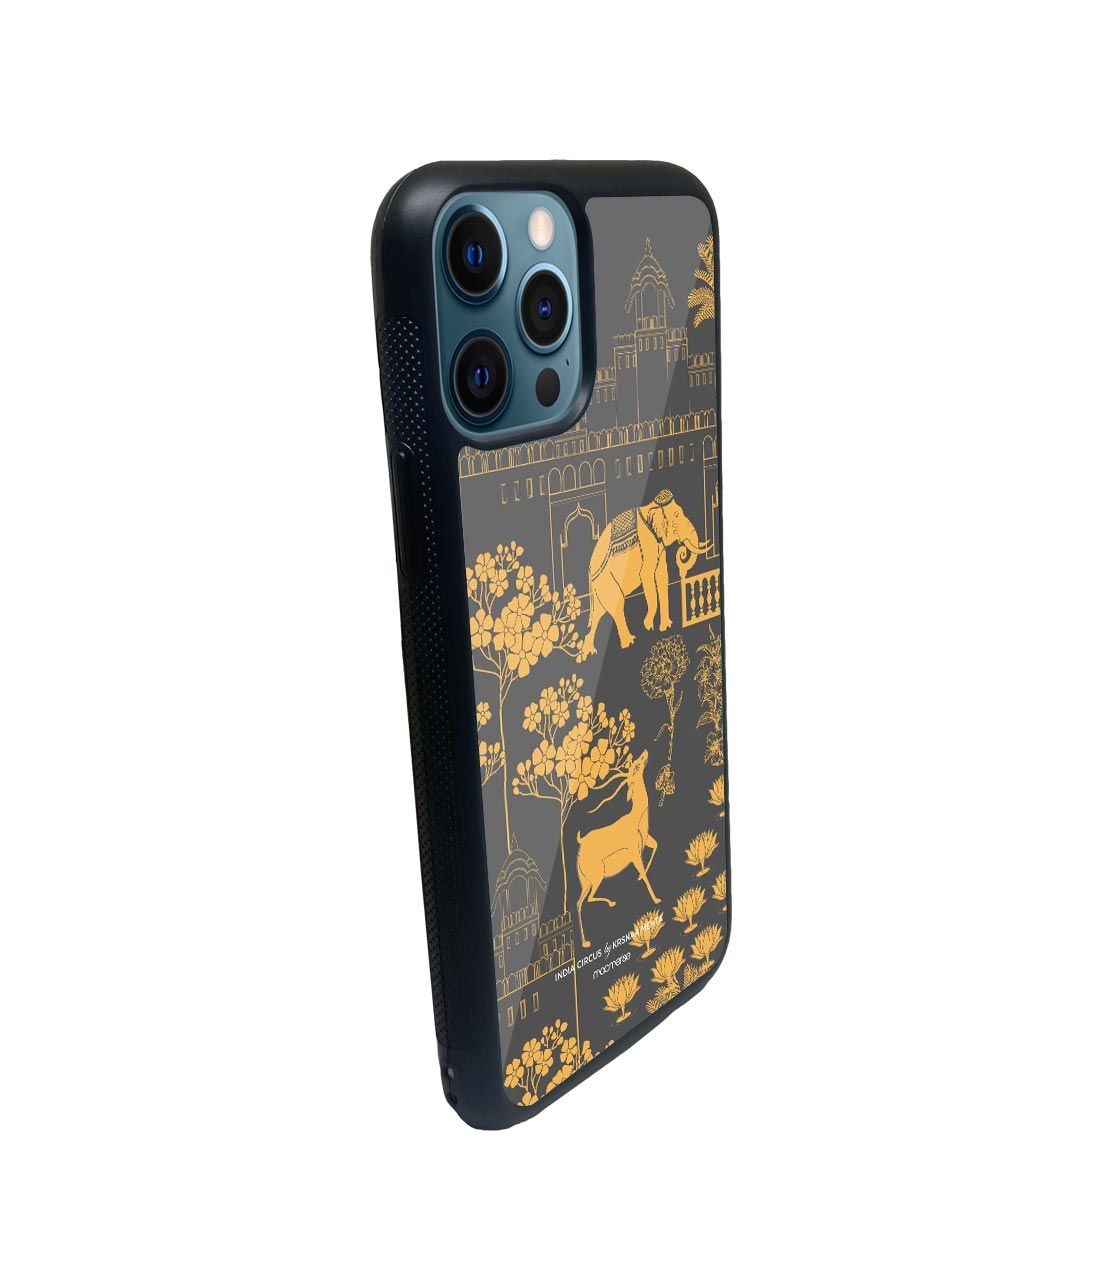 Regal spectacle - Glass Case for iPhone 12 Pro Max